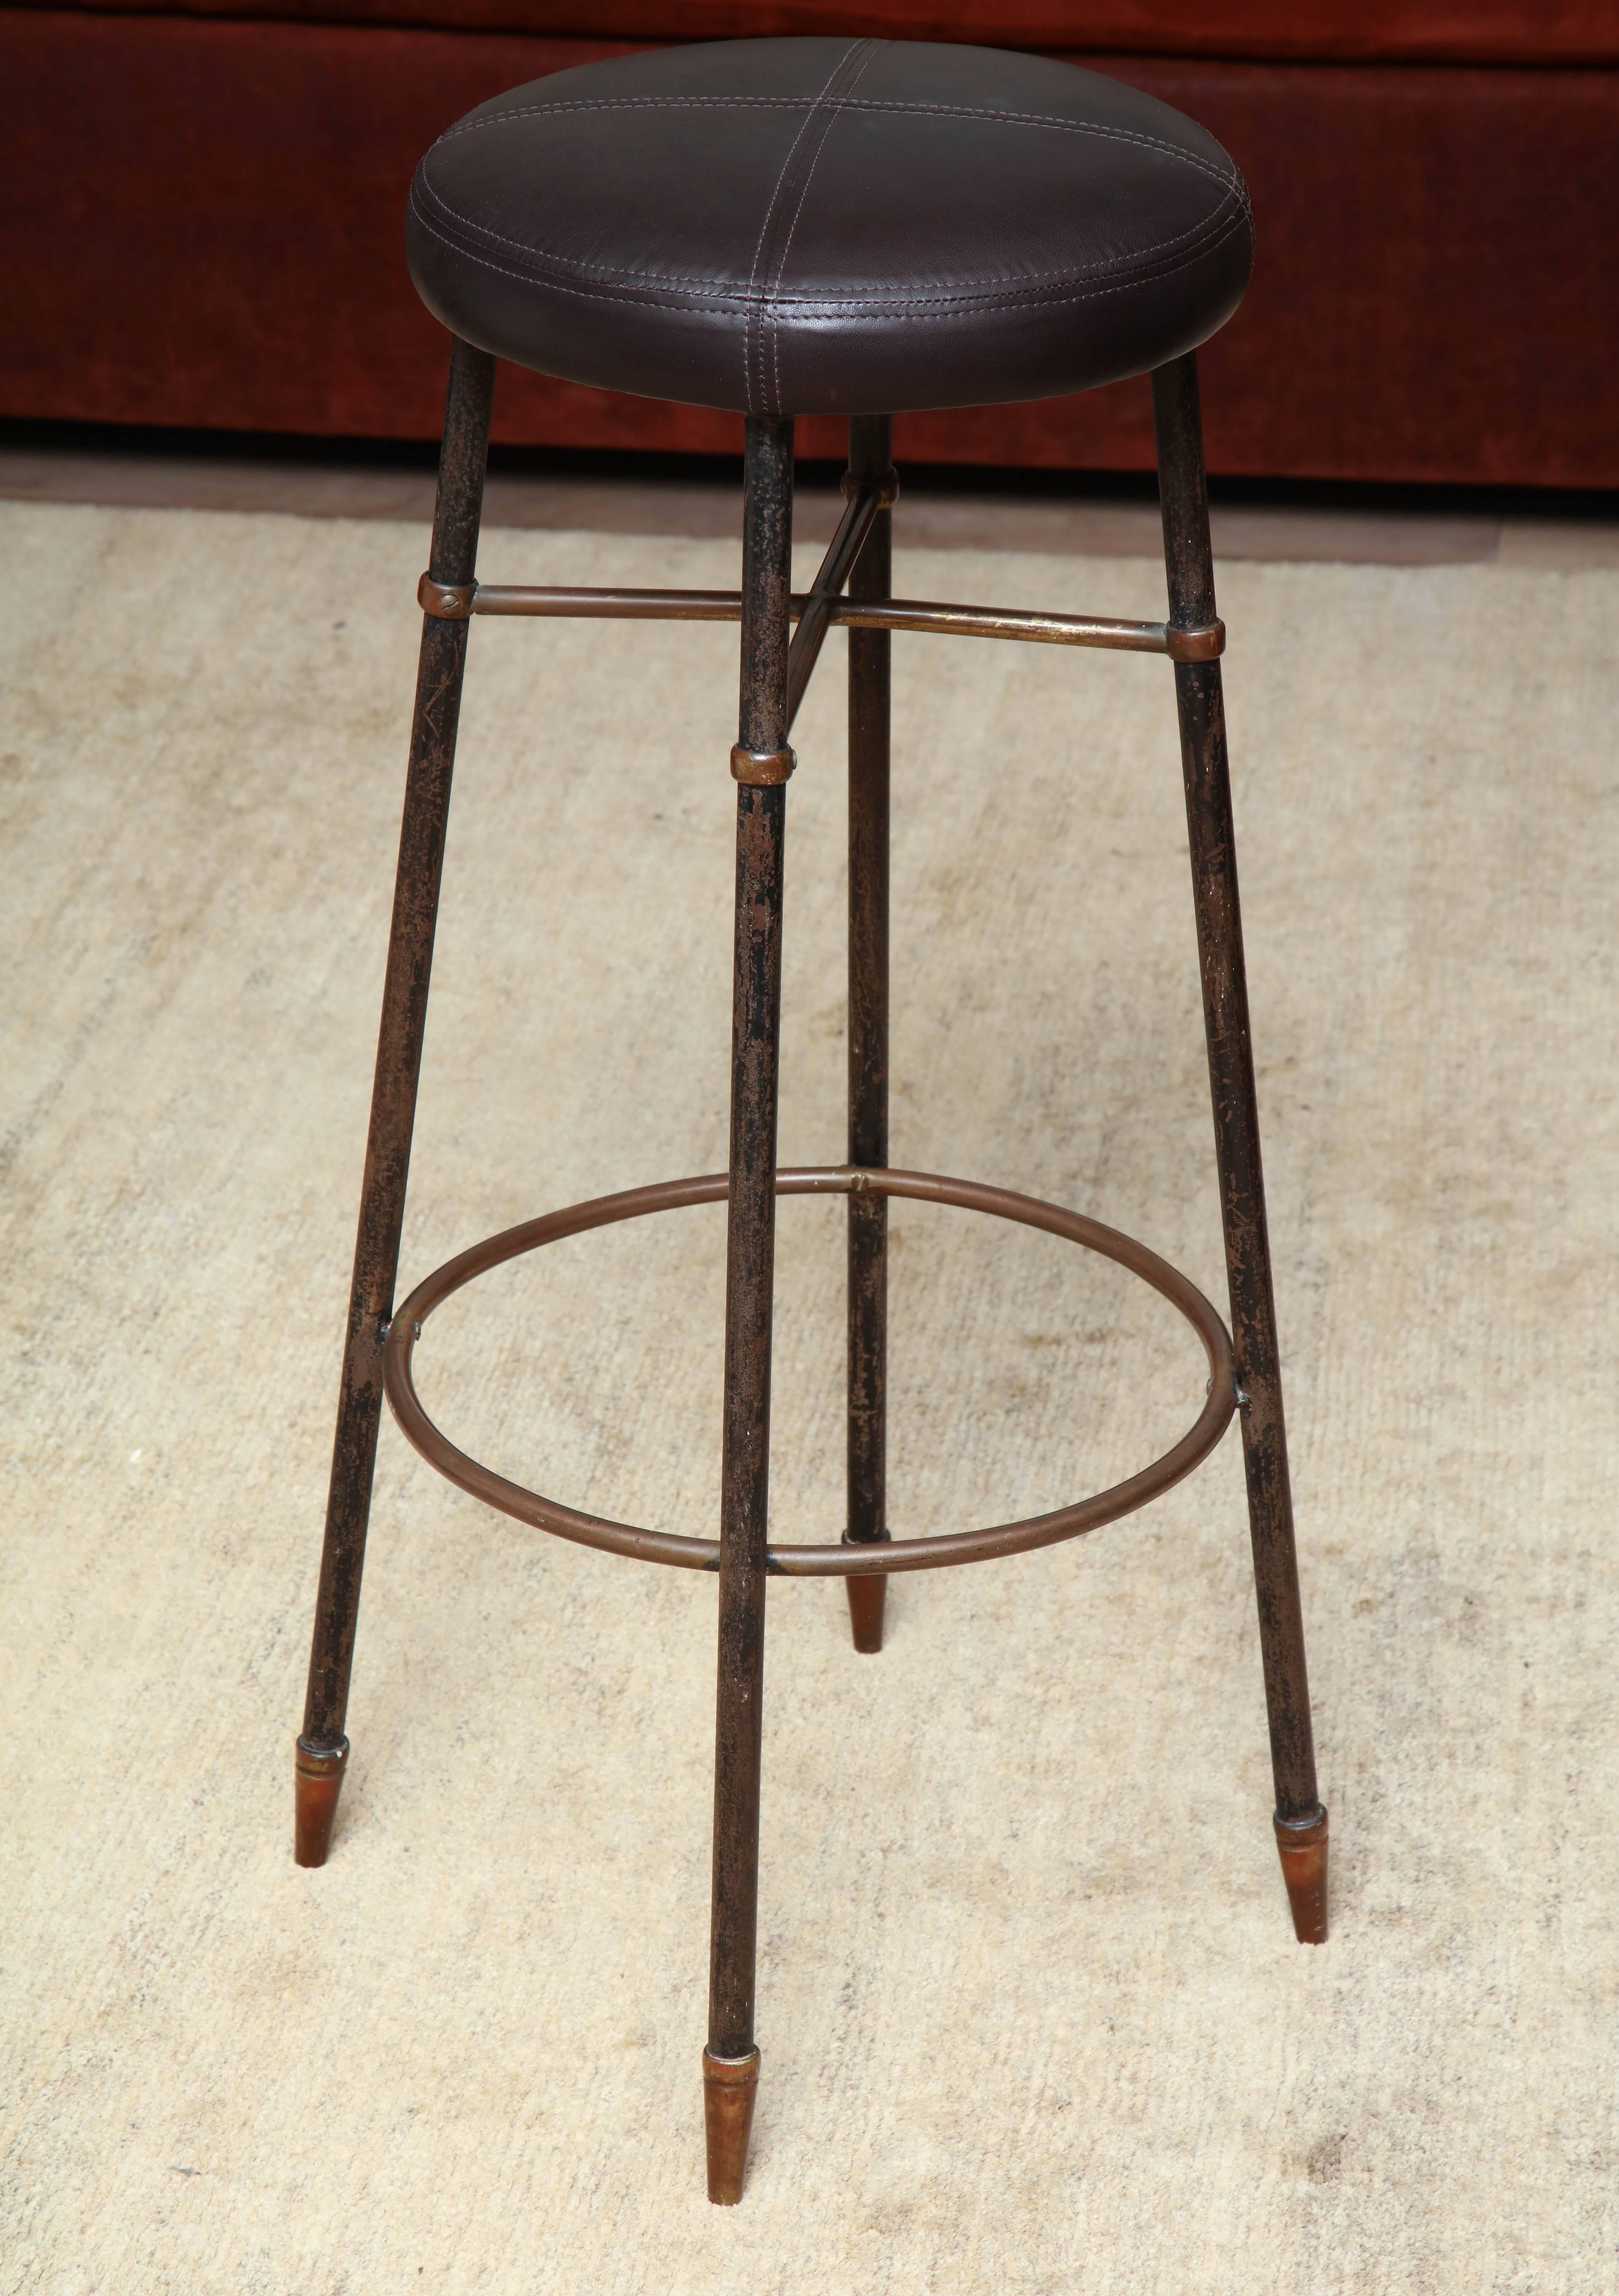 Pair of Italian barstools with original patina, circa 1950 reupholstered in brown leather with saddle stitch detail.
 